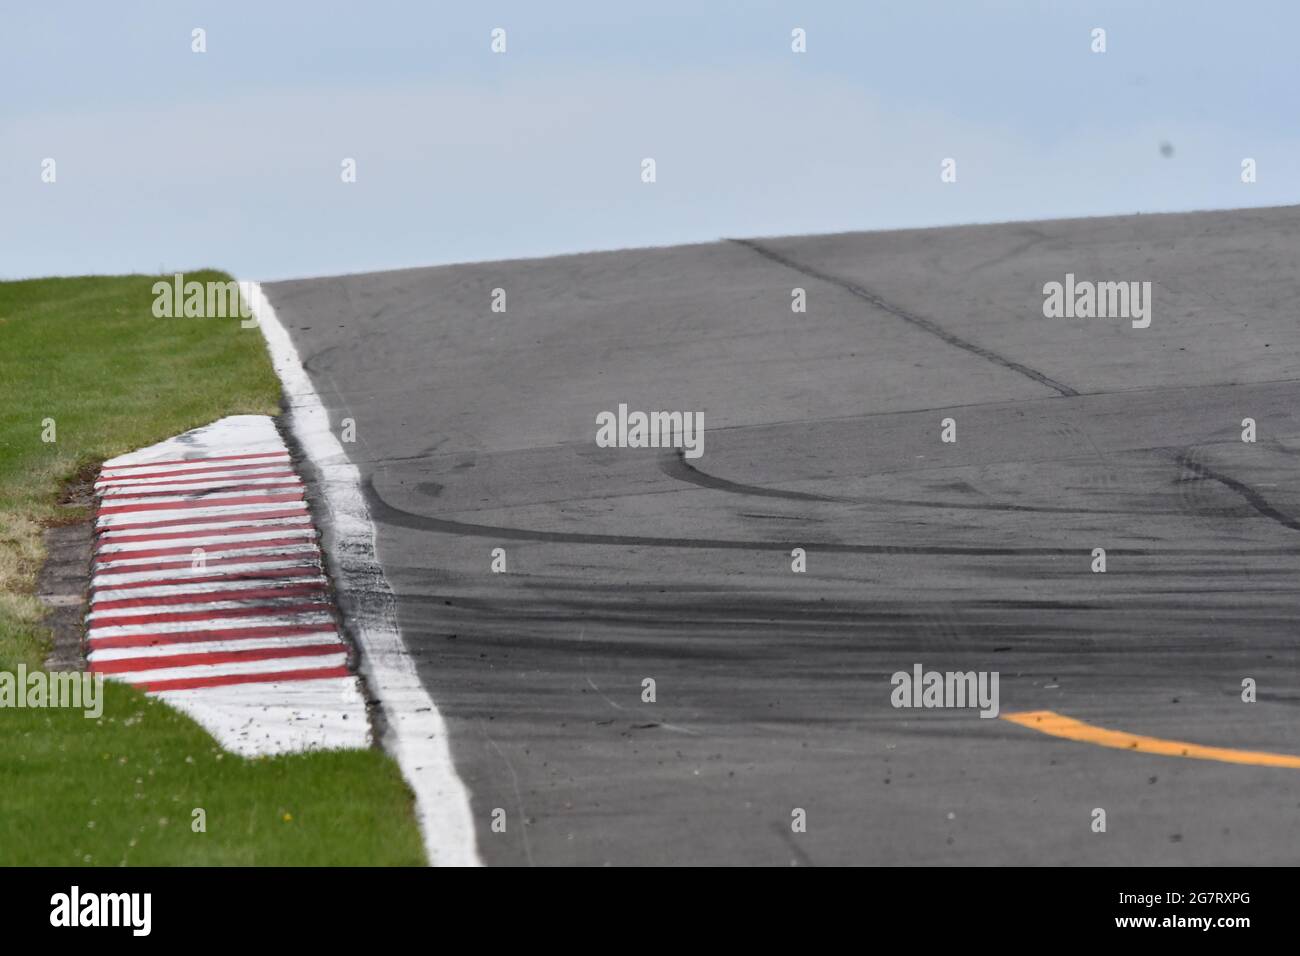 Part of a racetrack showing the rubber from the wheels as the cars have run onto the chevrons Stock Photo